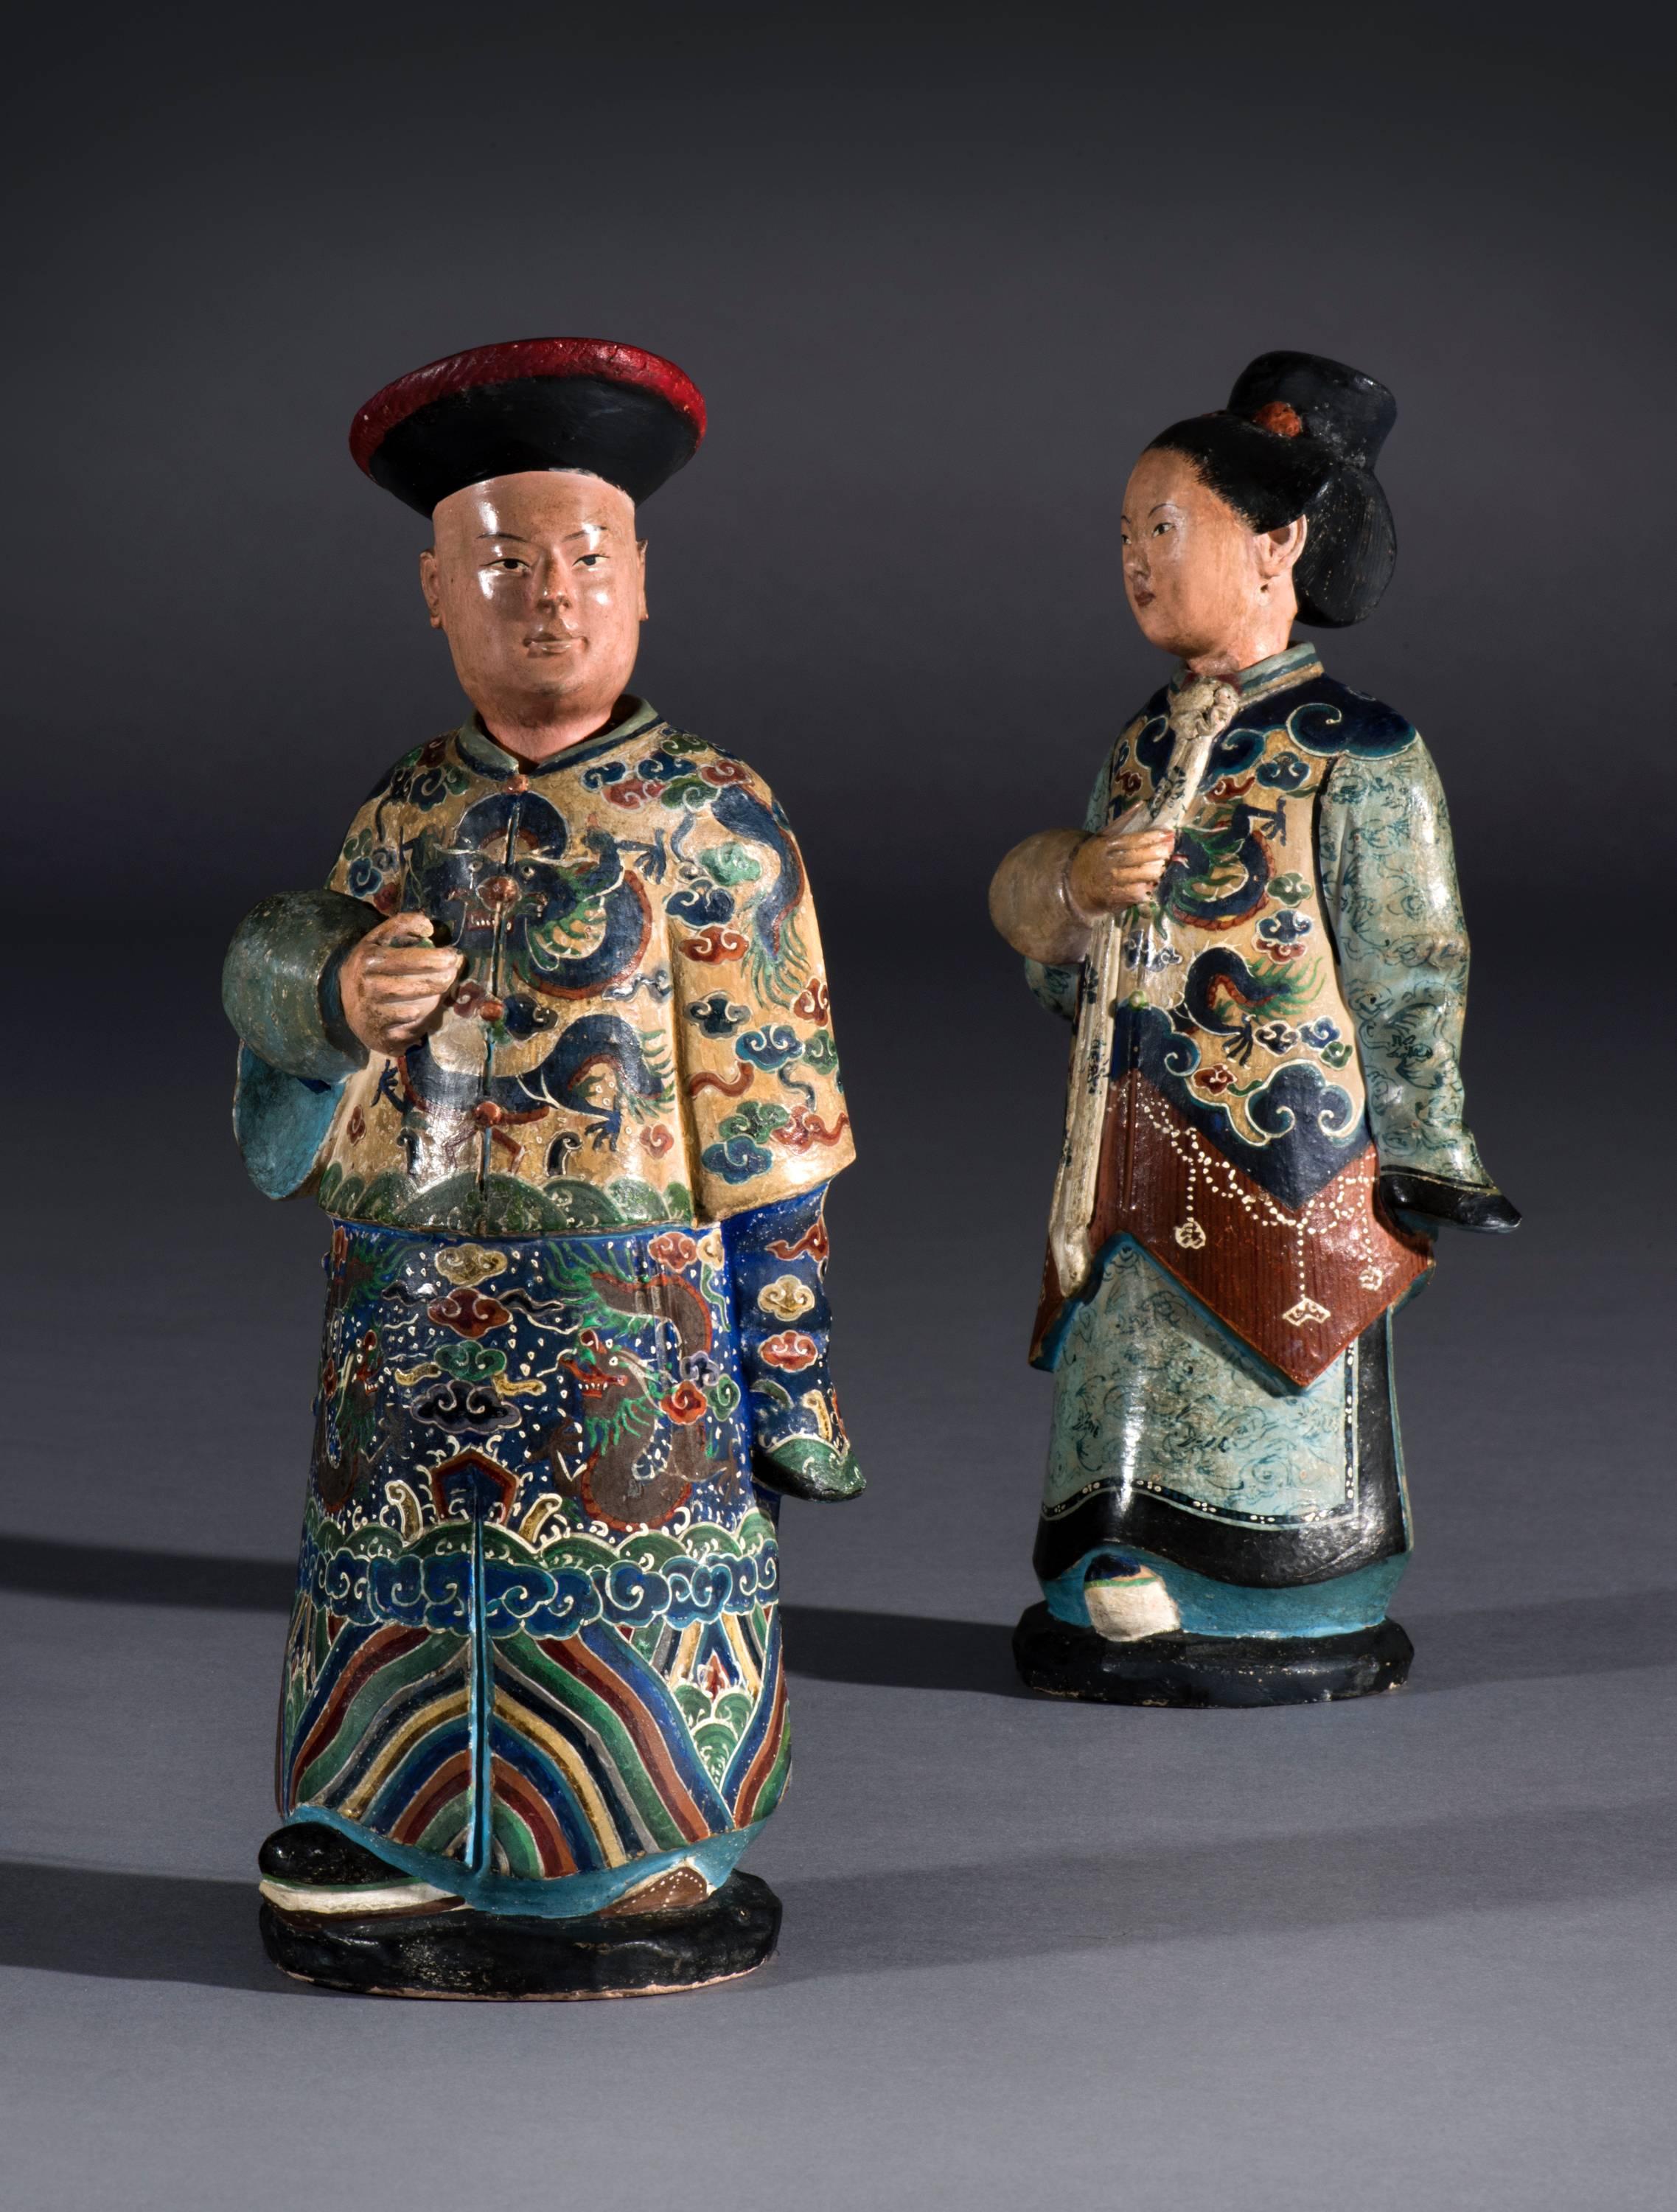 Rare pair of early 19th century Chinese painted clay nodding figures.